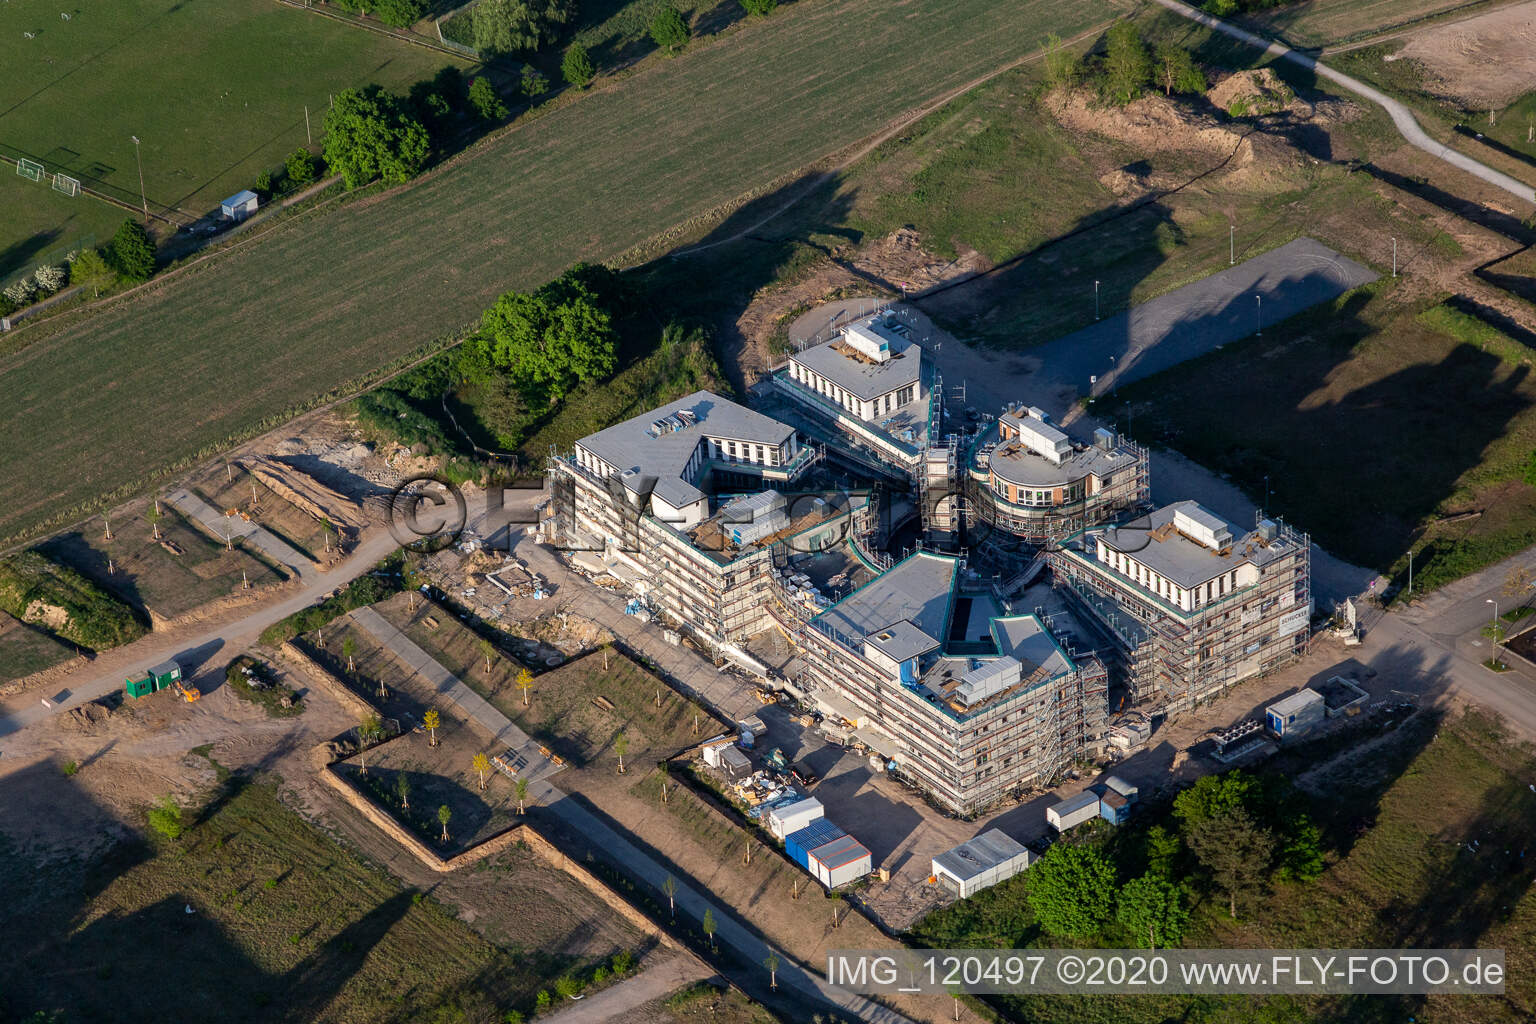 Drone recording of Construction site of the LTC - Linder Technology Campus on Wilhelm-Schickard-Straße in the Technology Park Karlsruhe in the district Rintheim in Karlsruhe in the state Baden-Wuerttemberg, Germany